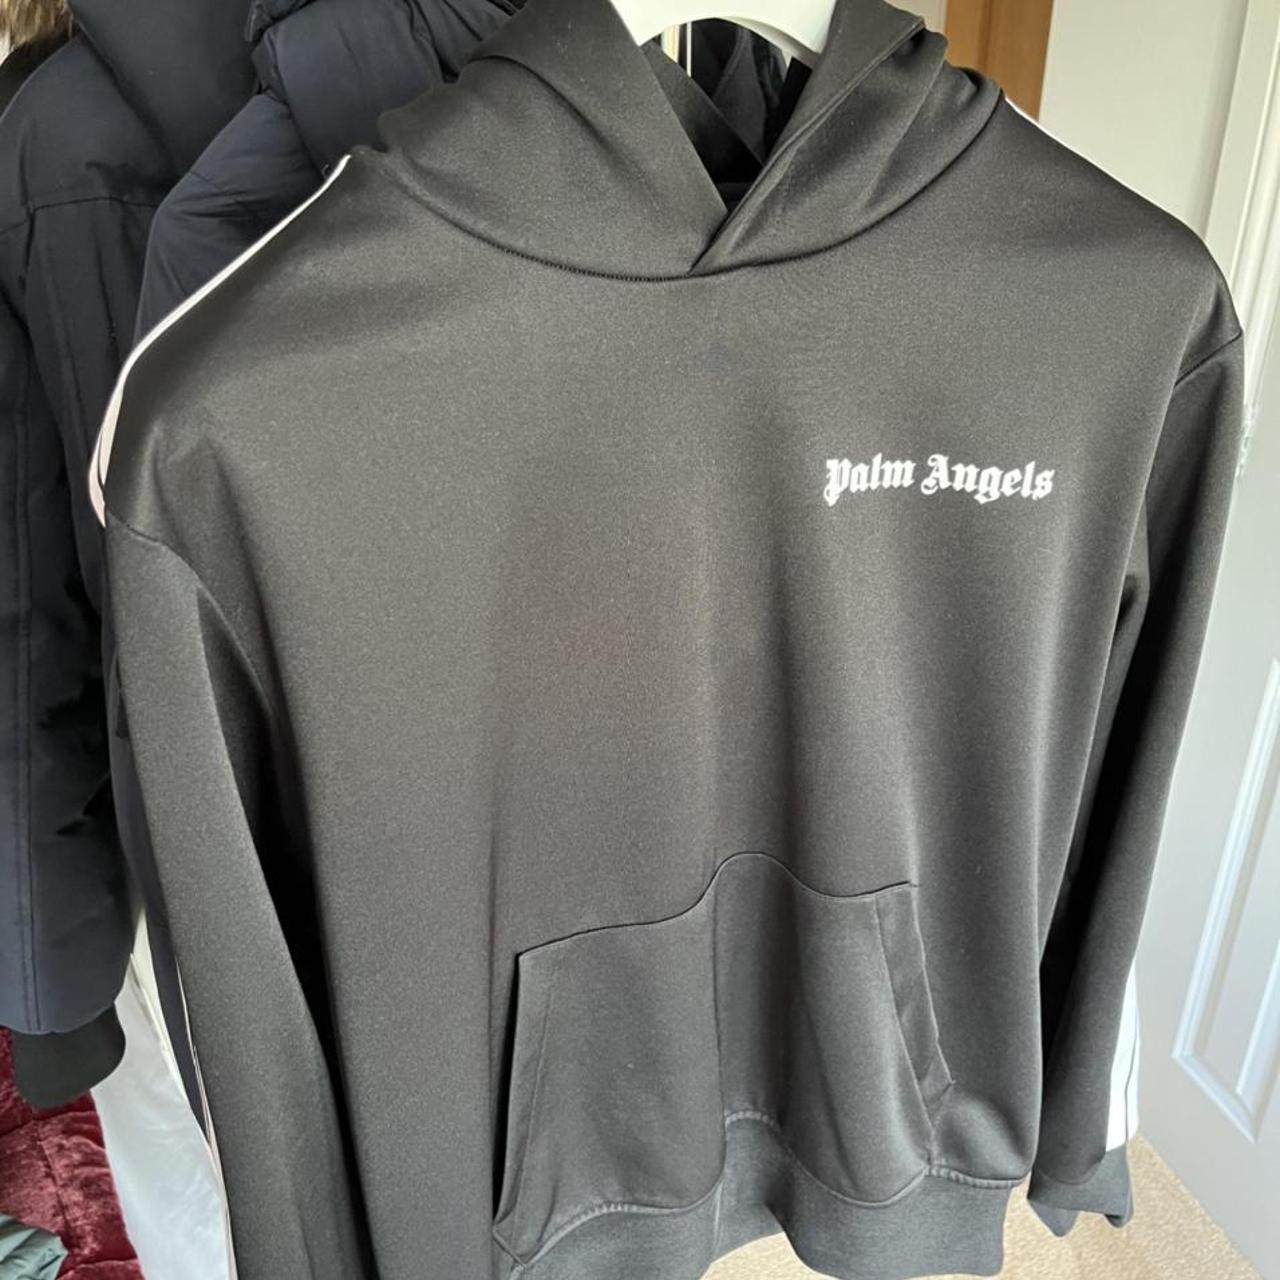 Palm Angles mens jumper- size S but fits M - Depop